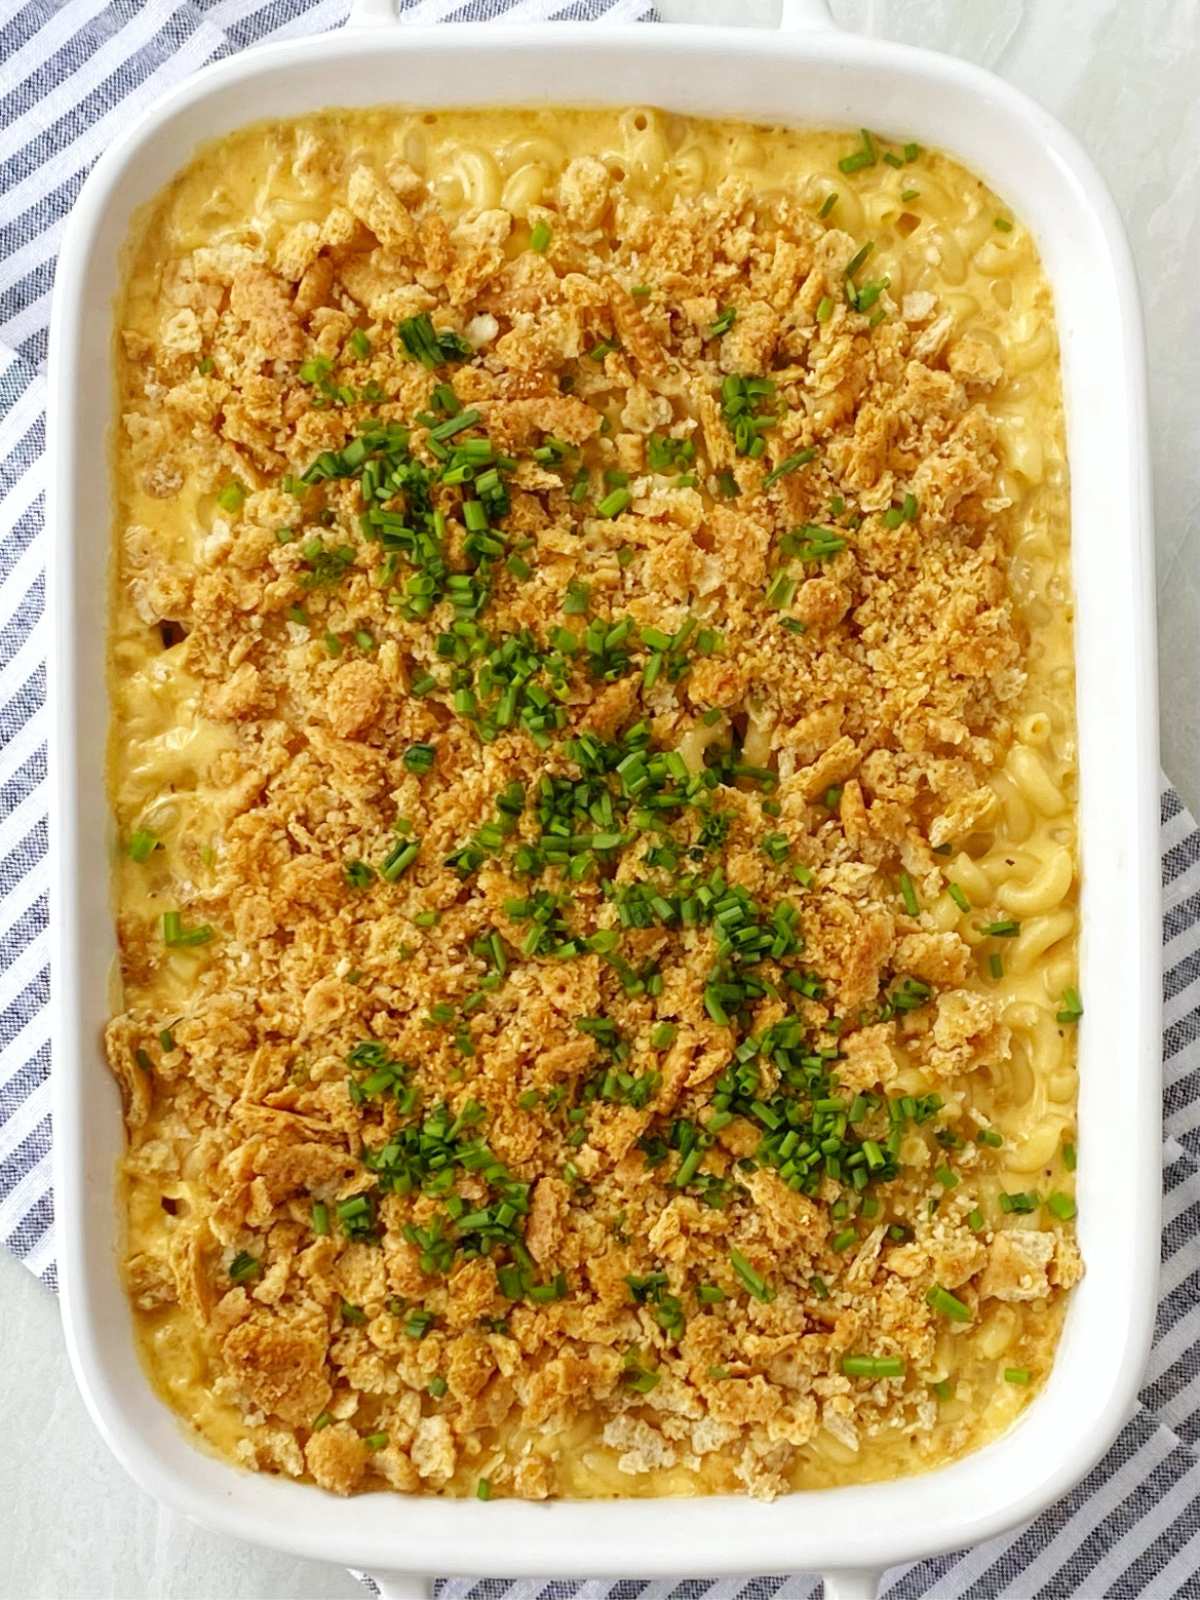 baked mac and cheese garnished with chopped chives.